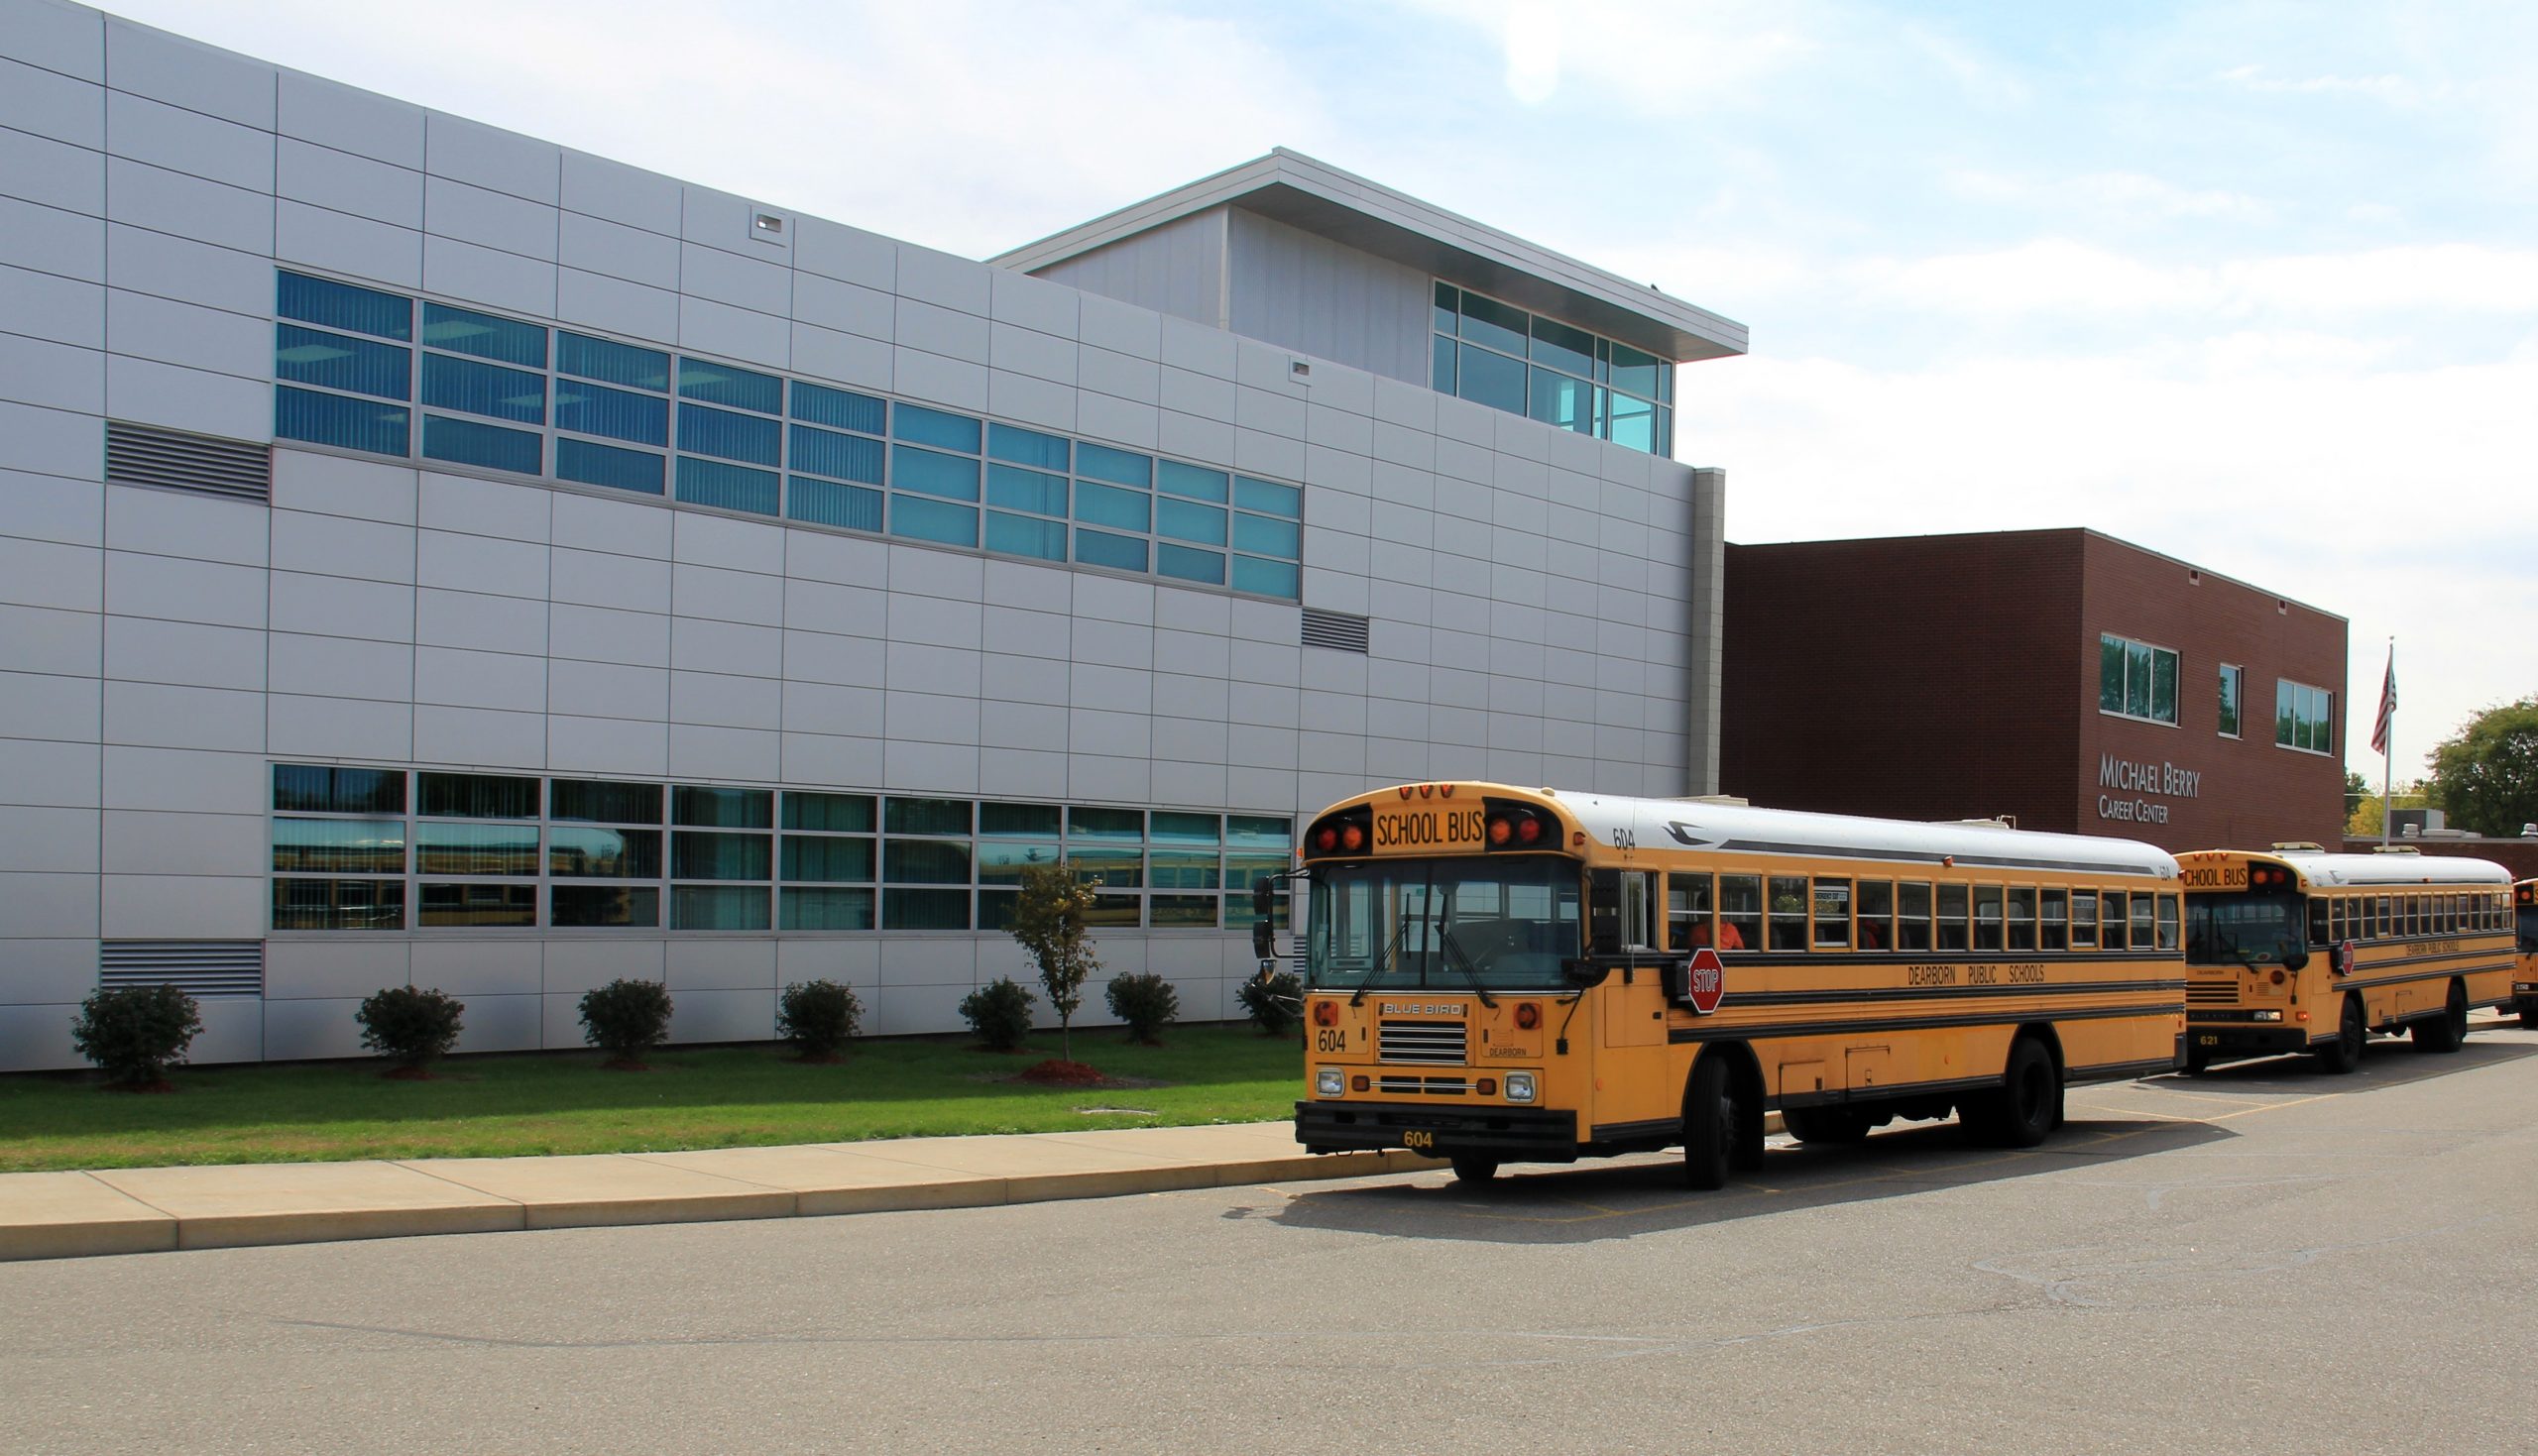 A bus parked in front of the Michael Berry Career Center in Dearborn, Michigan